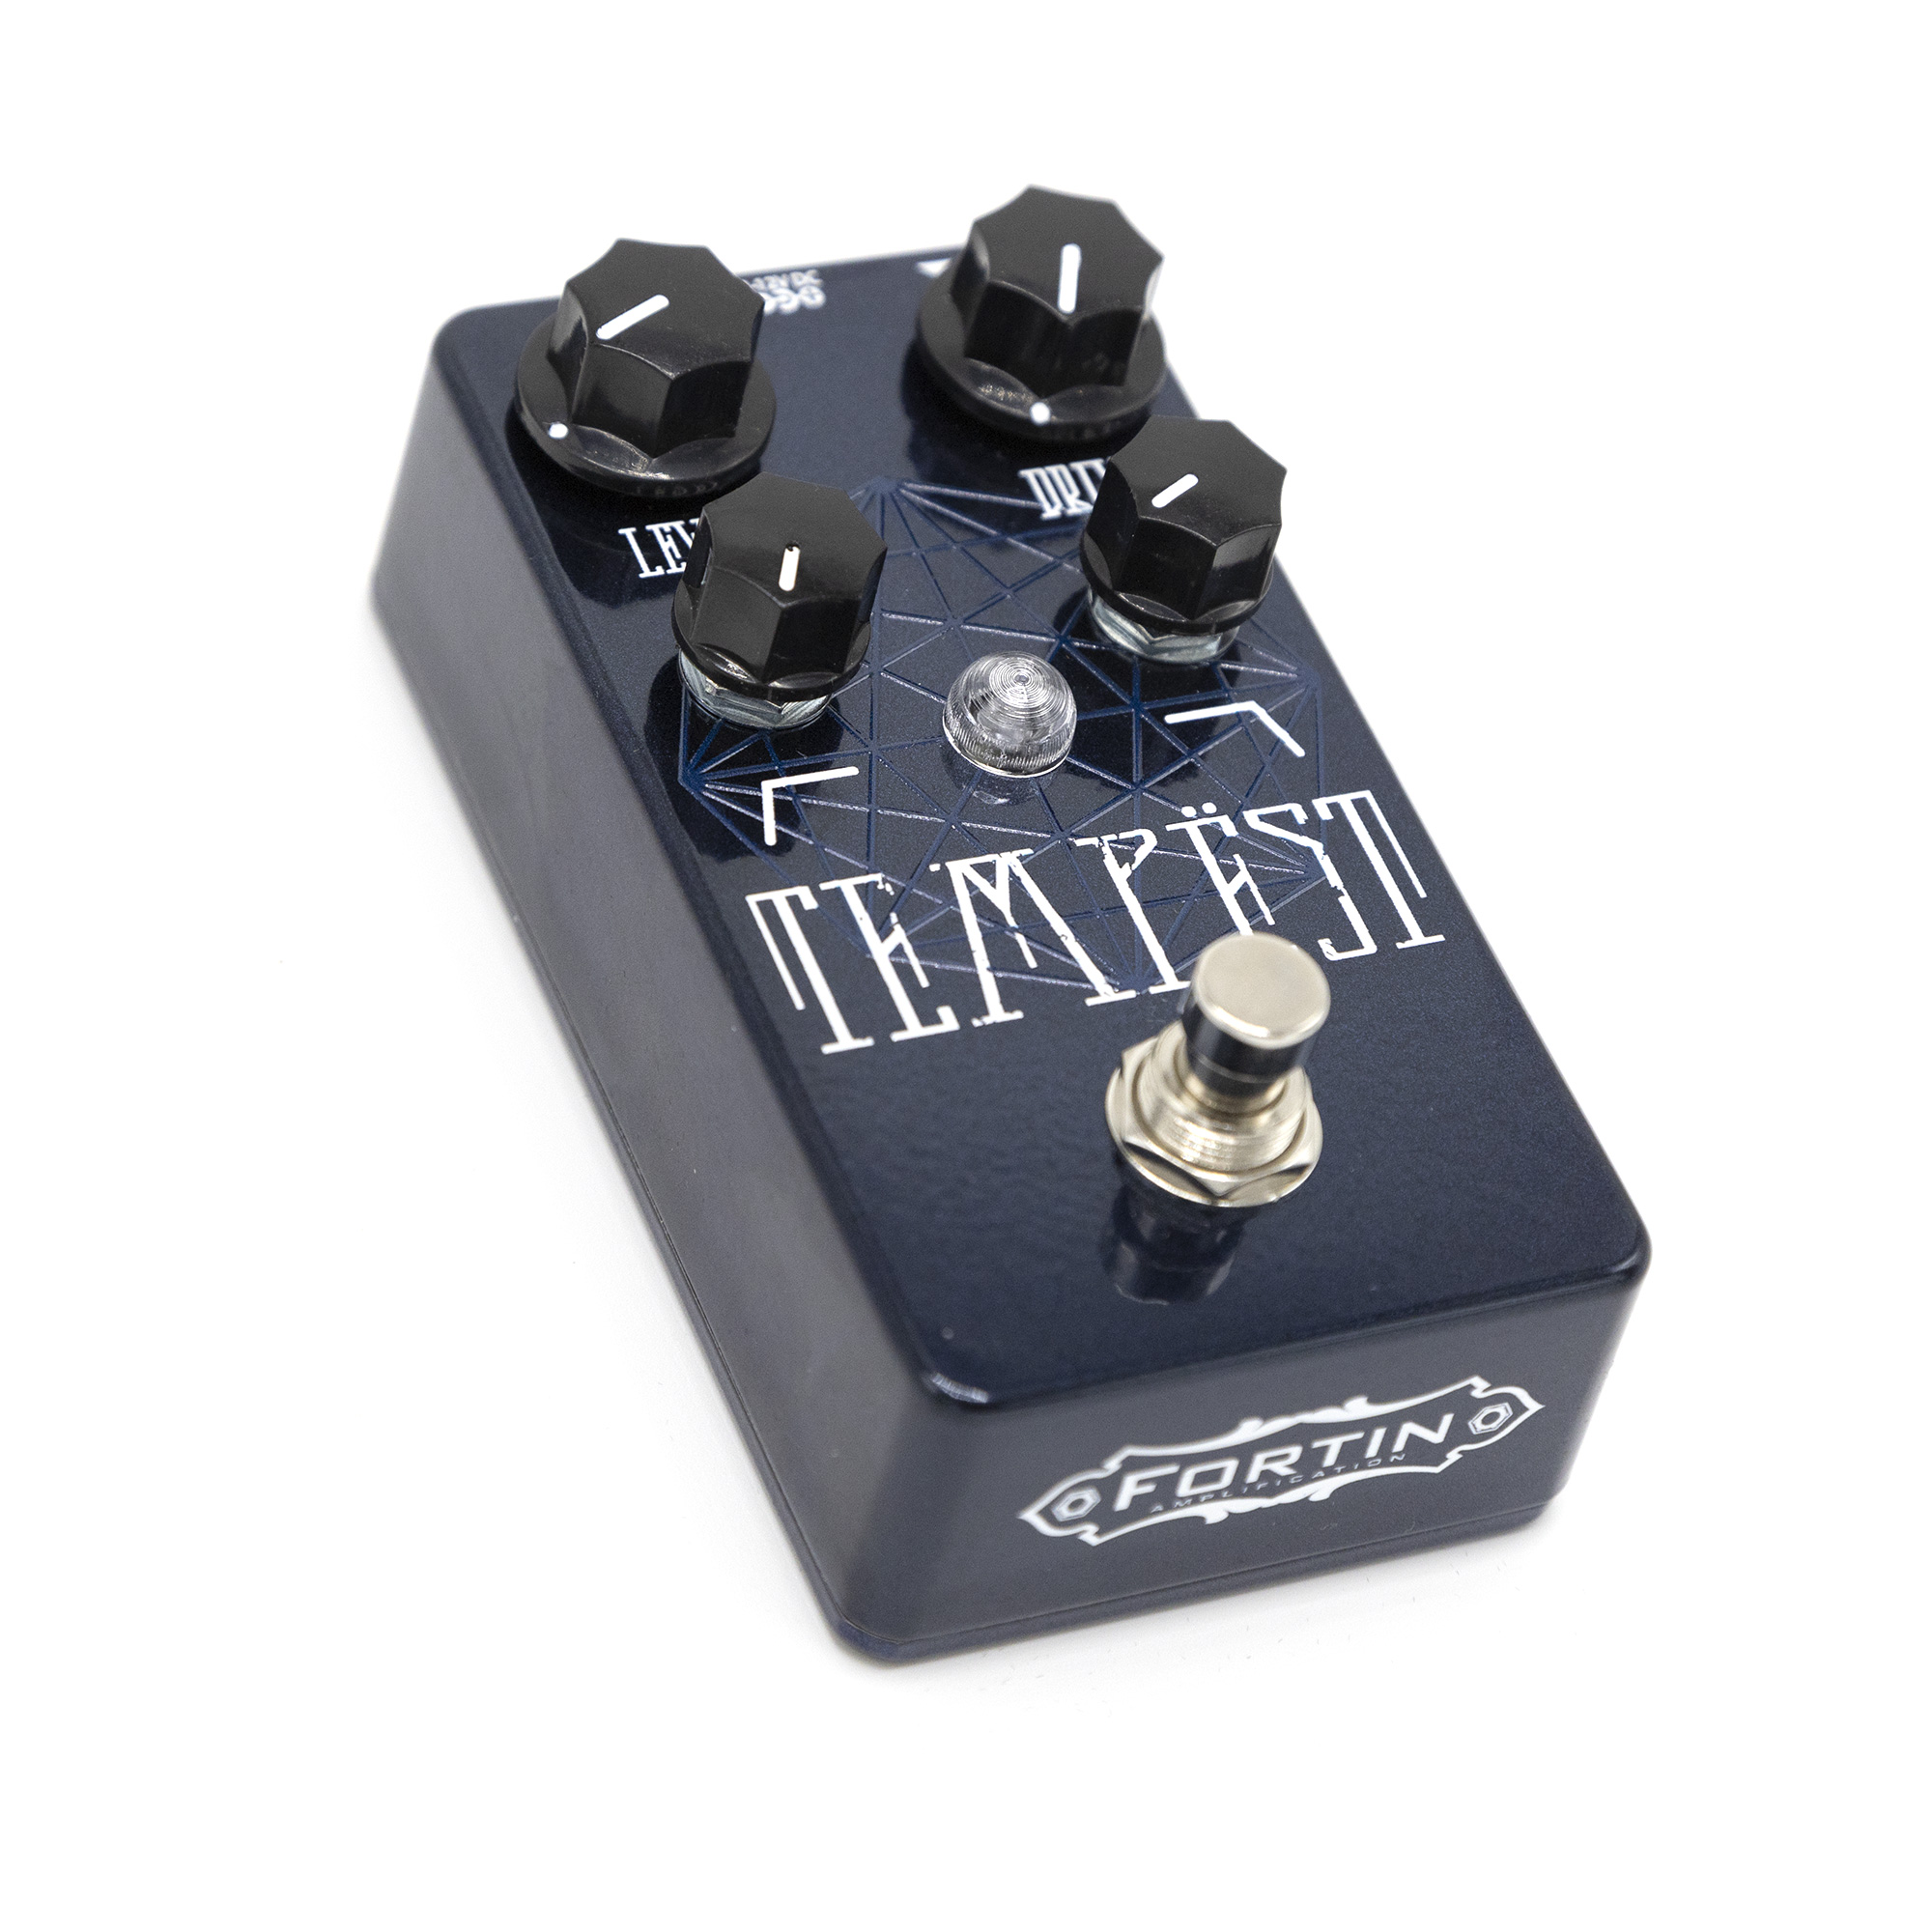 Fortin Amps Tempest Architects Signature Pedal - Pedal overdrive / distorsión / fuzz - Variation 1